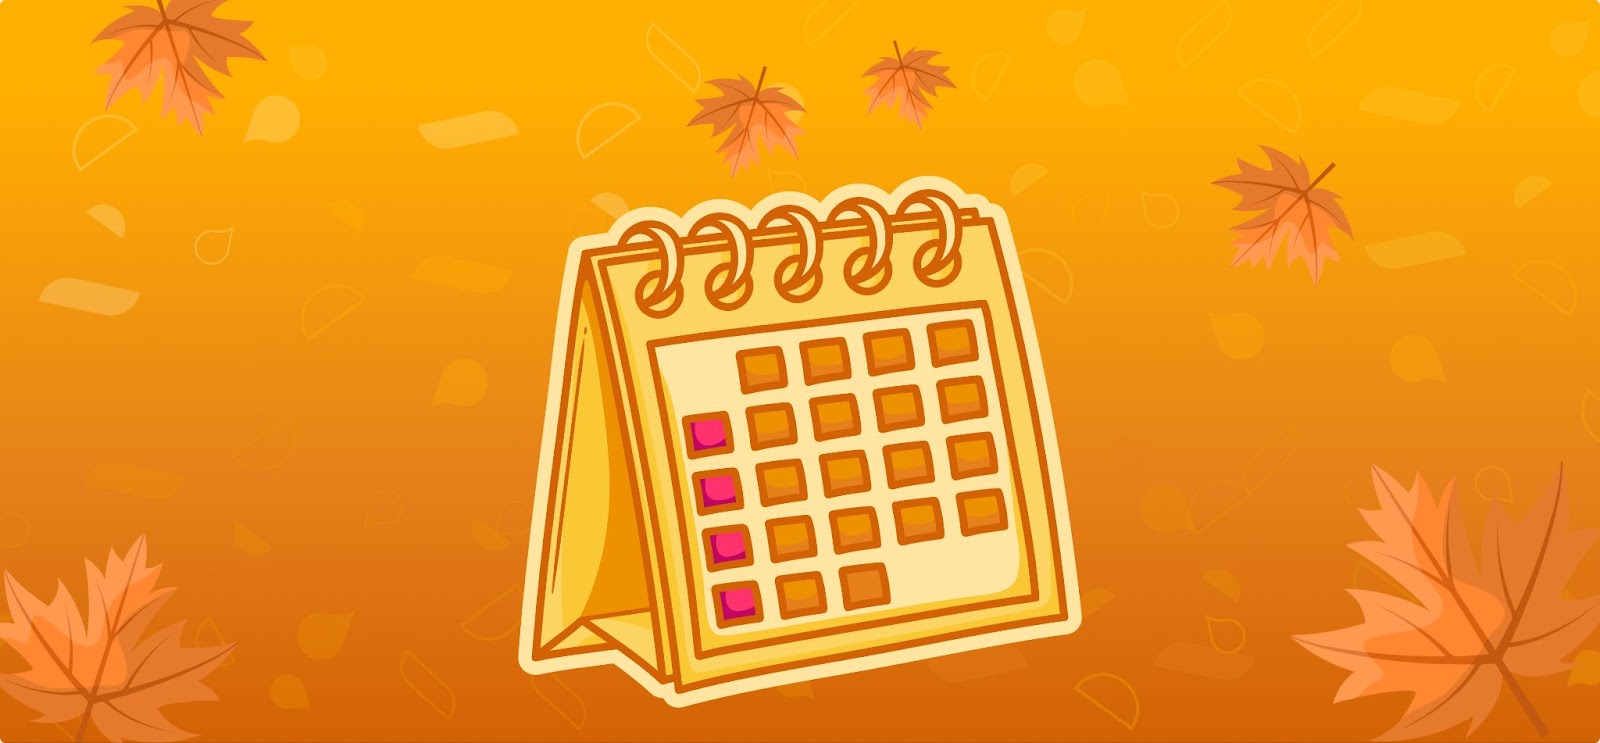 Linchpin Intranet Suite 5.8: Your Intranet just got better! - image of a calendar with an orange autumnal background